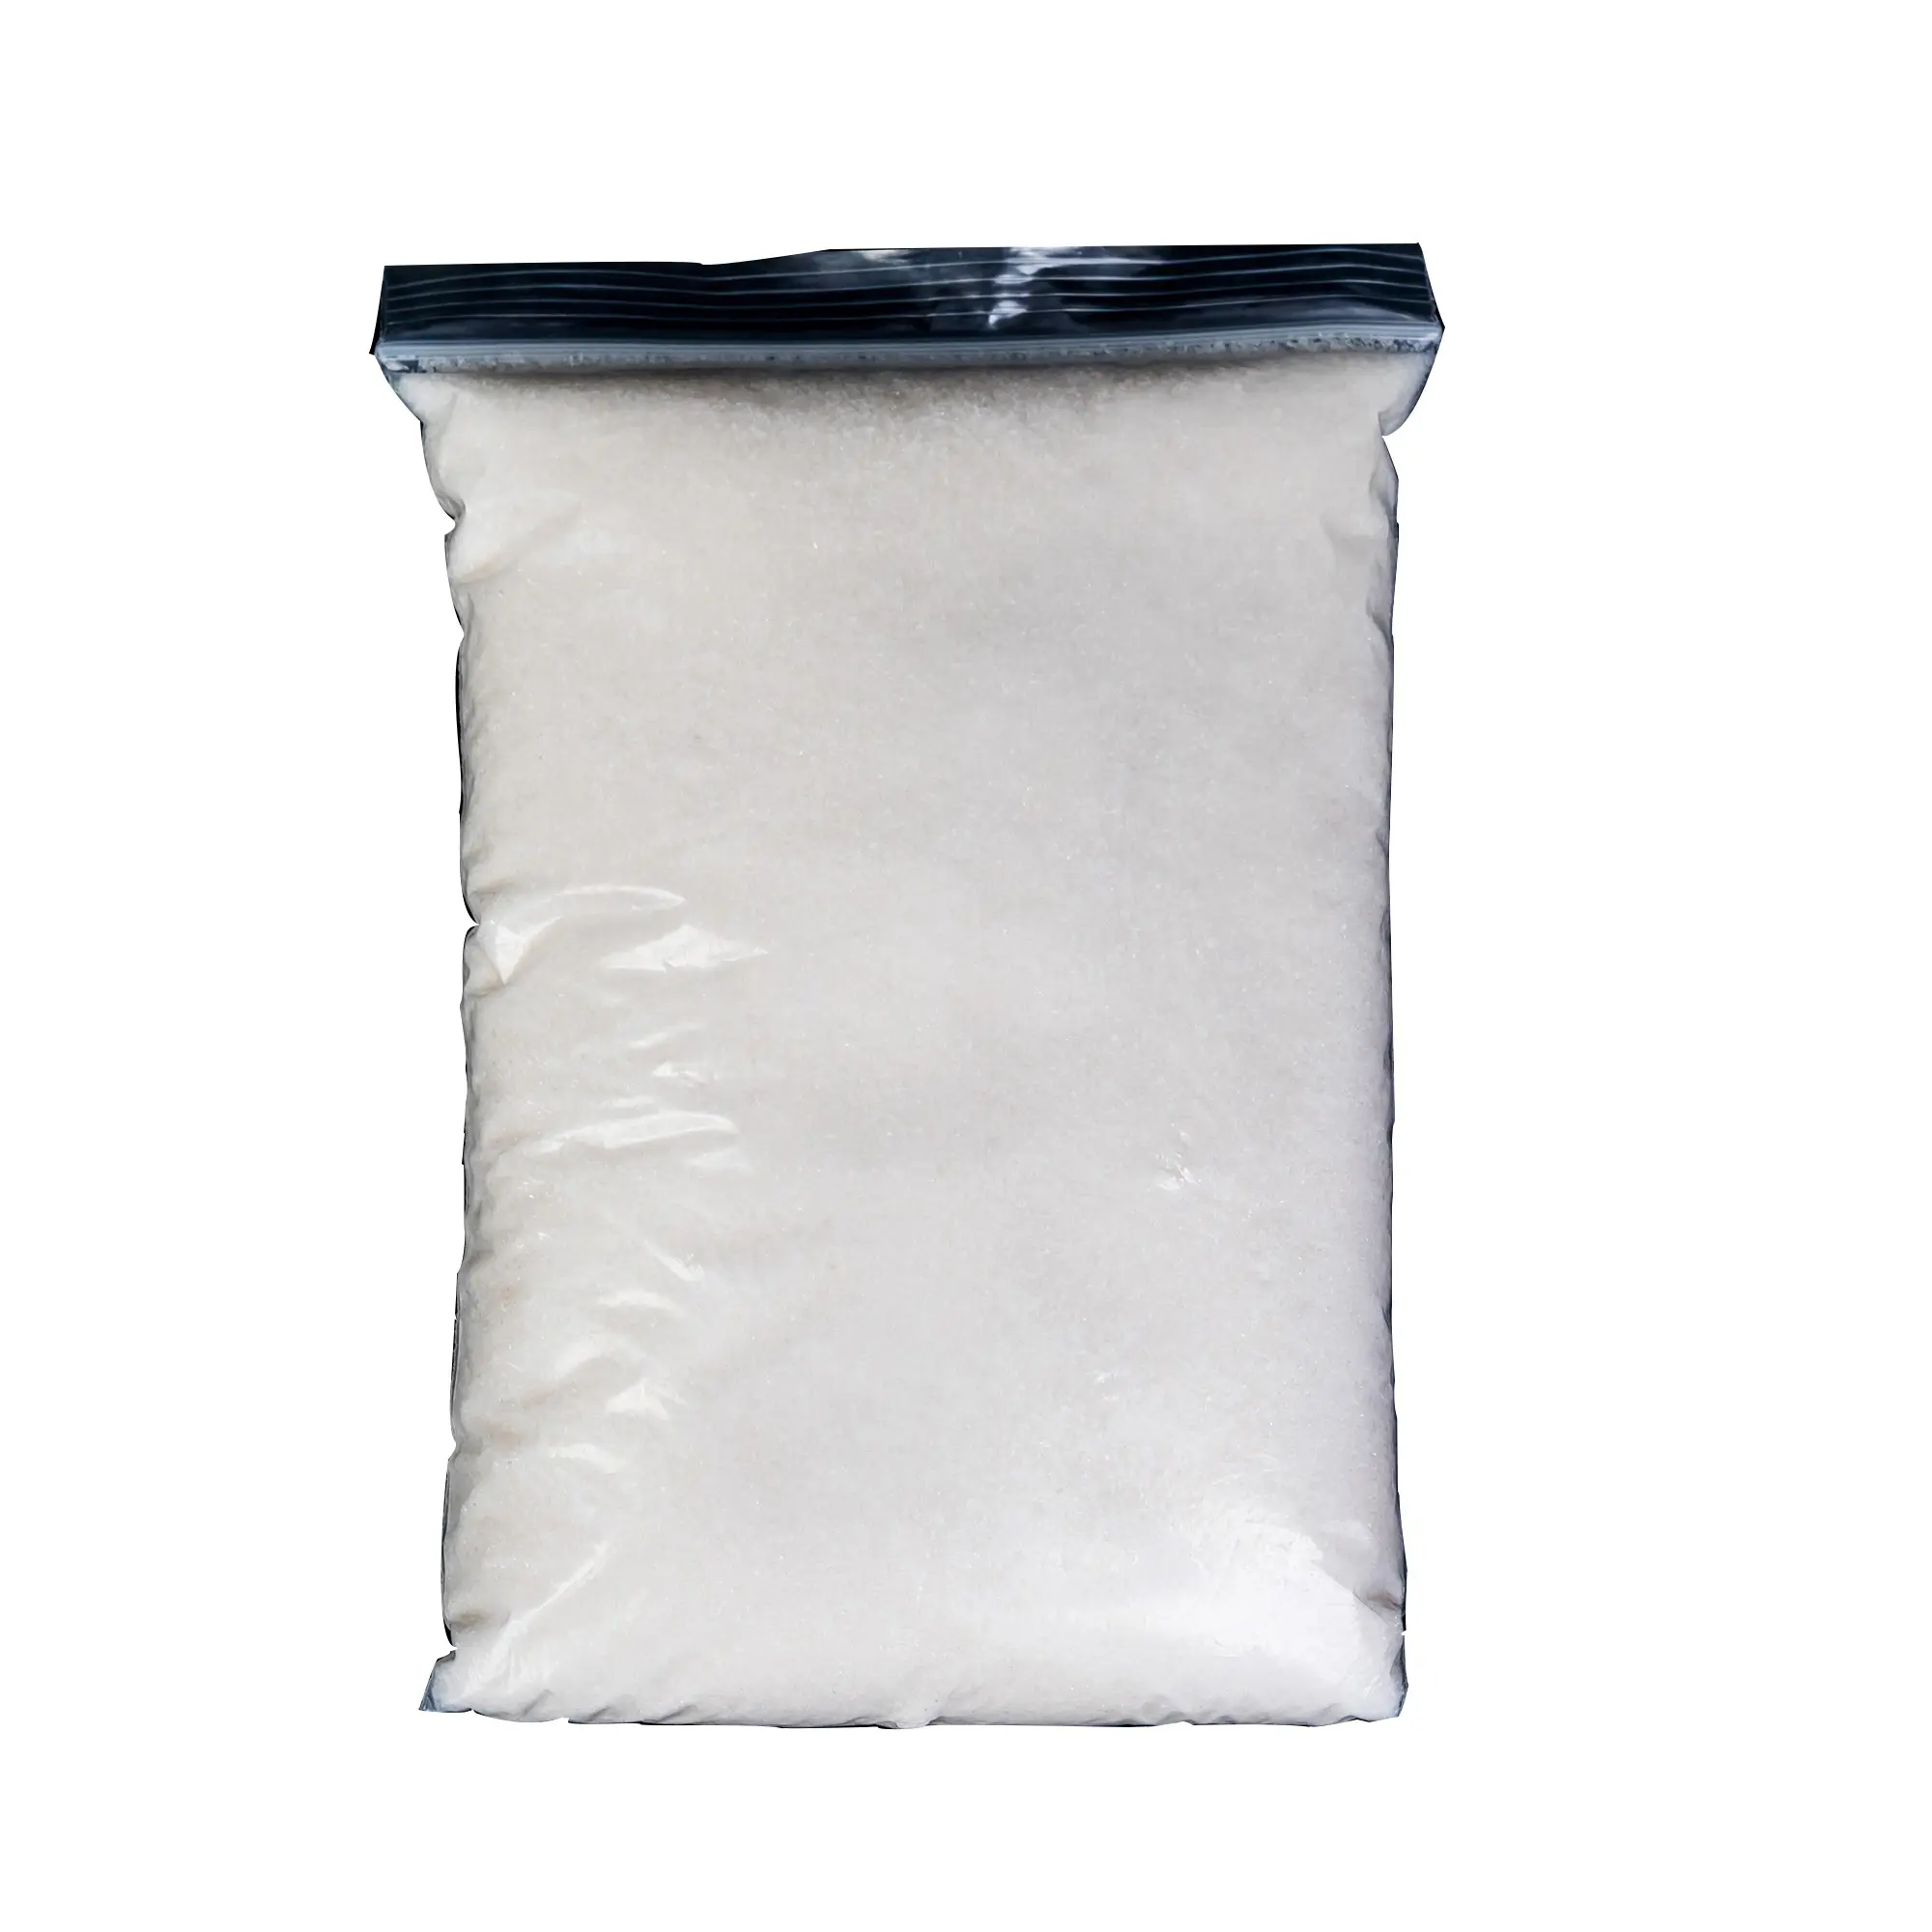 Wholesale Cheap Price Raw Materials Super Water Absorbent Sap Polymer for Baby Diaper Sanitary Napkin